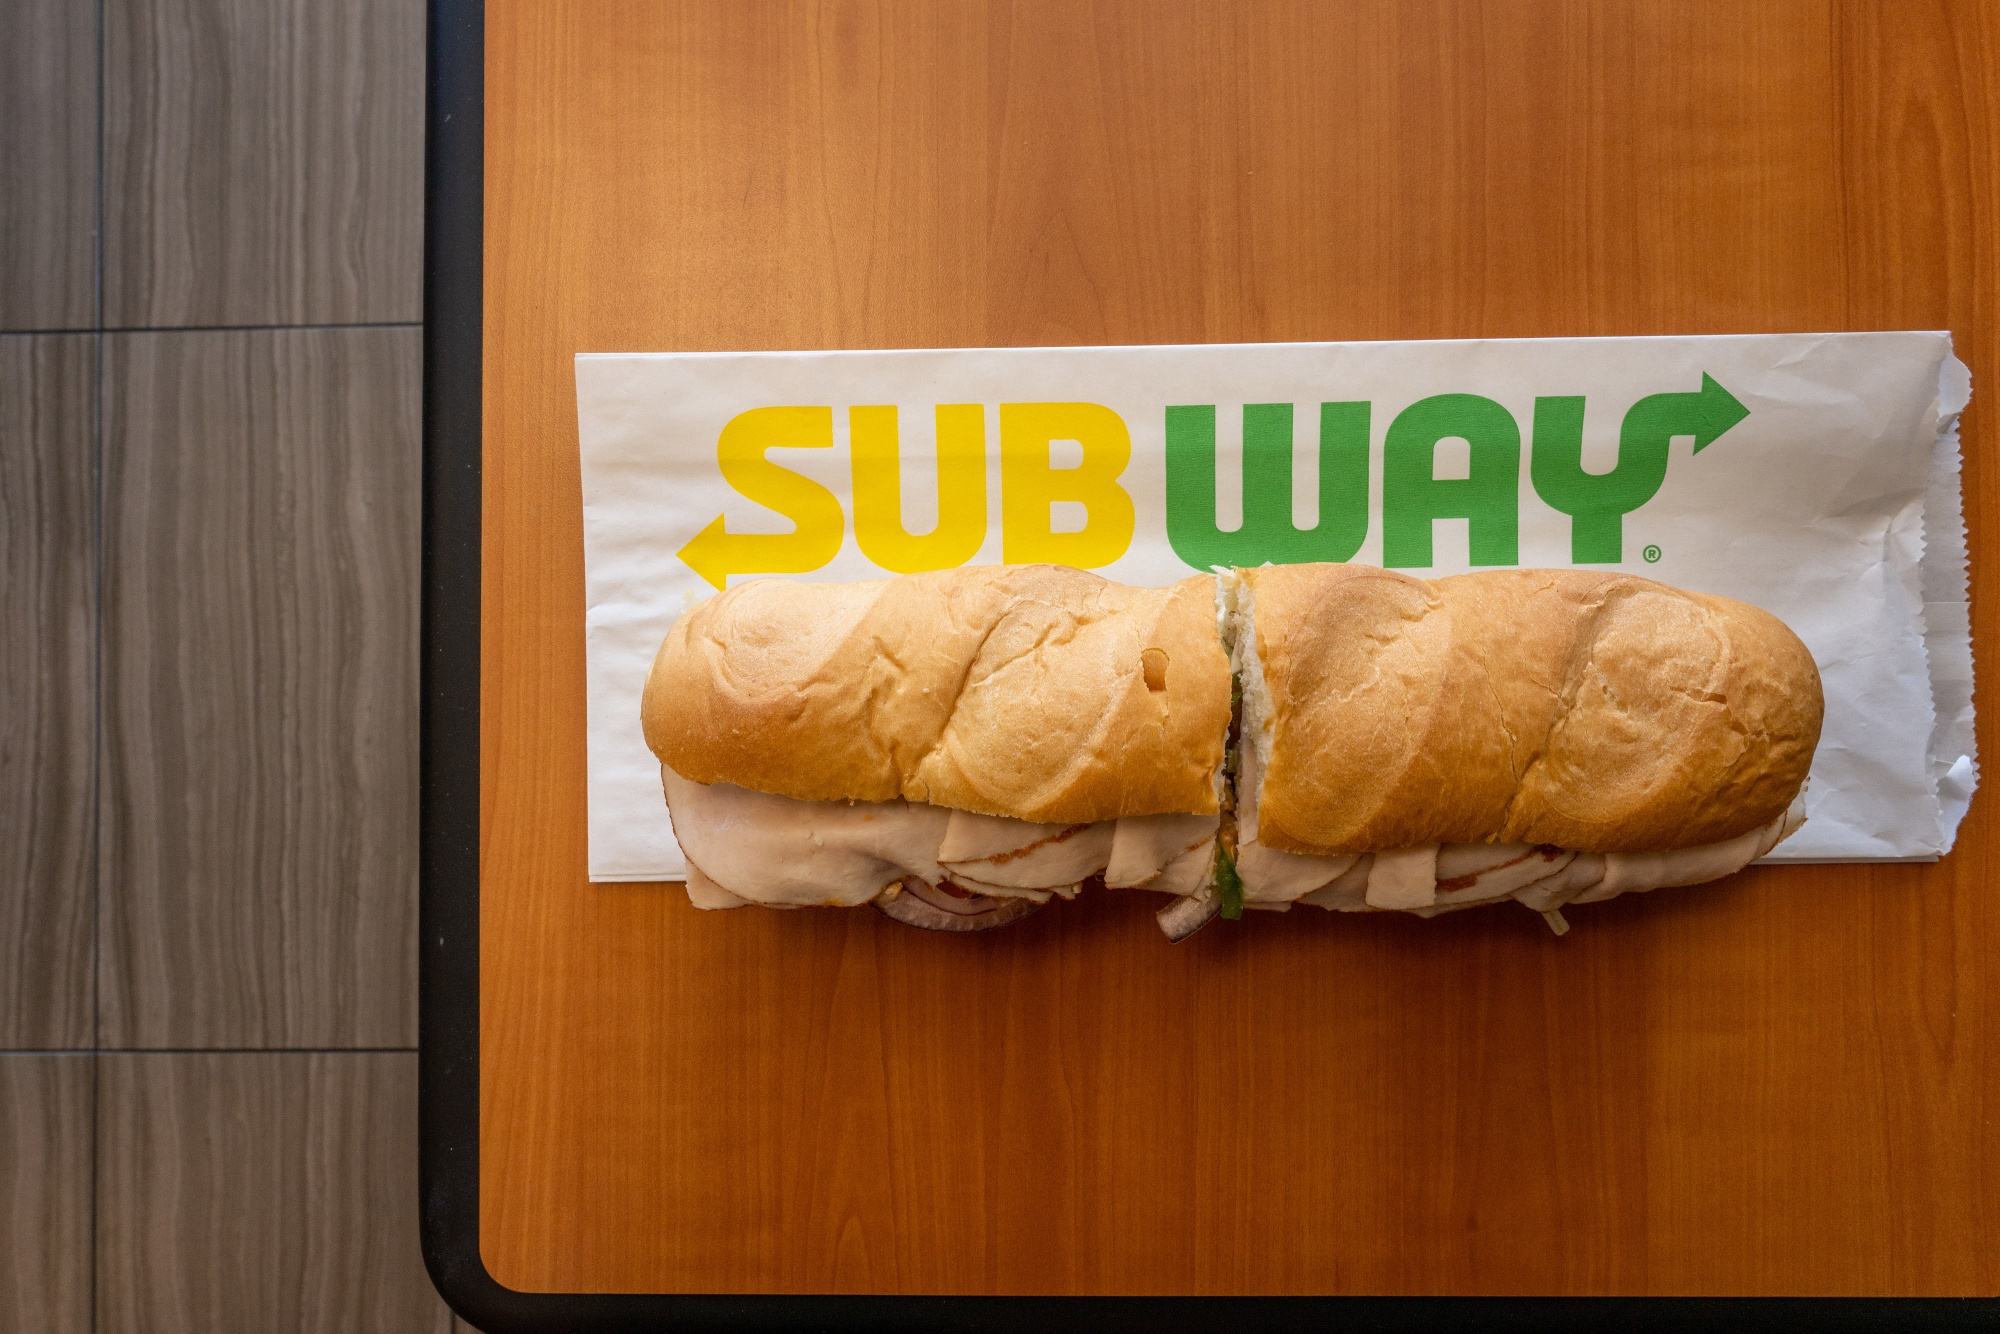 Subway makes major change to its menu, biggest in chain's history